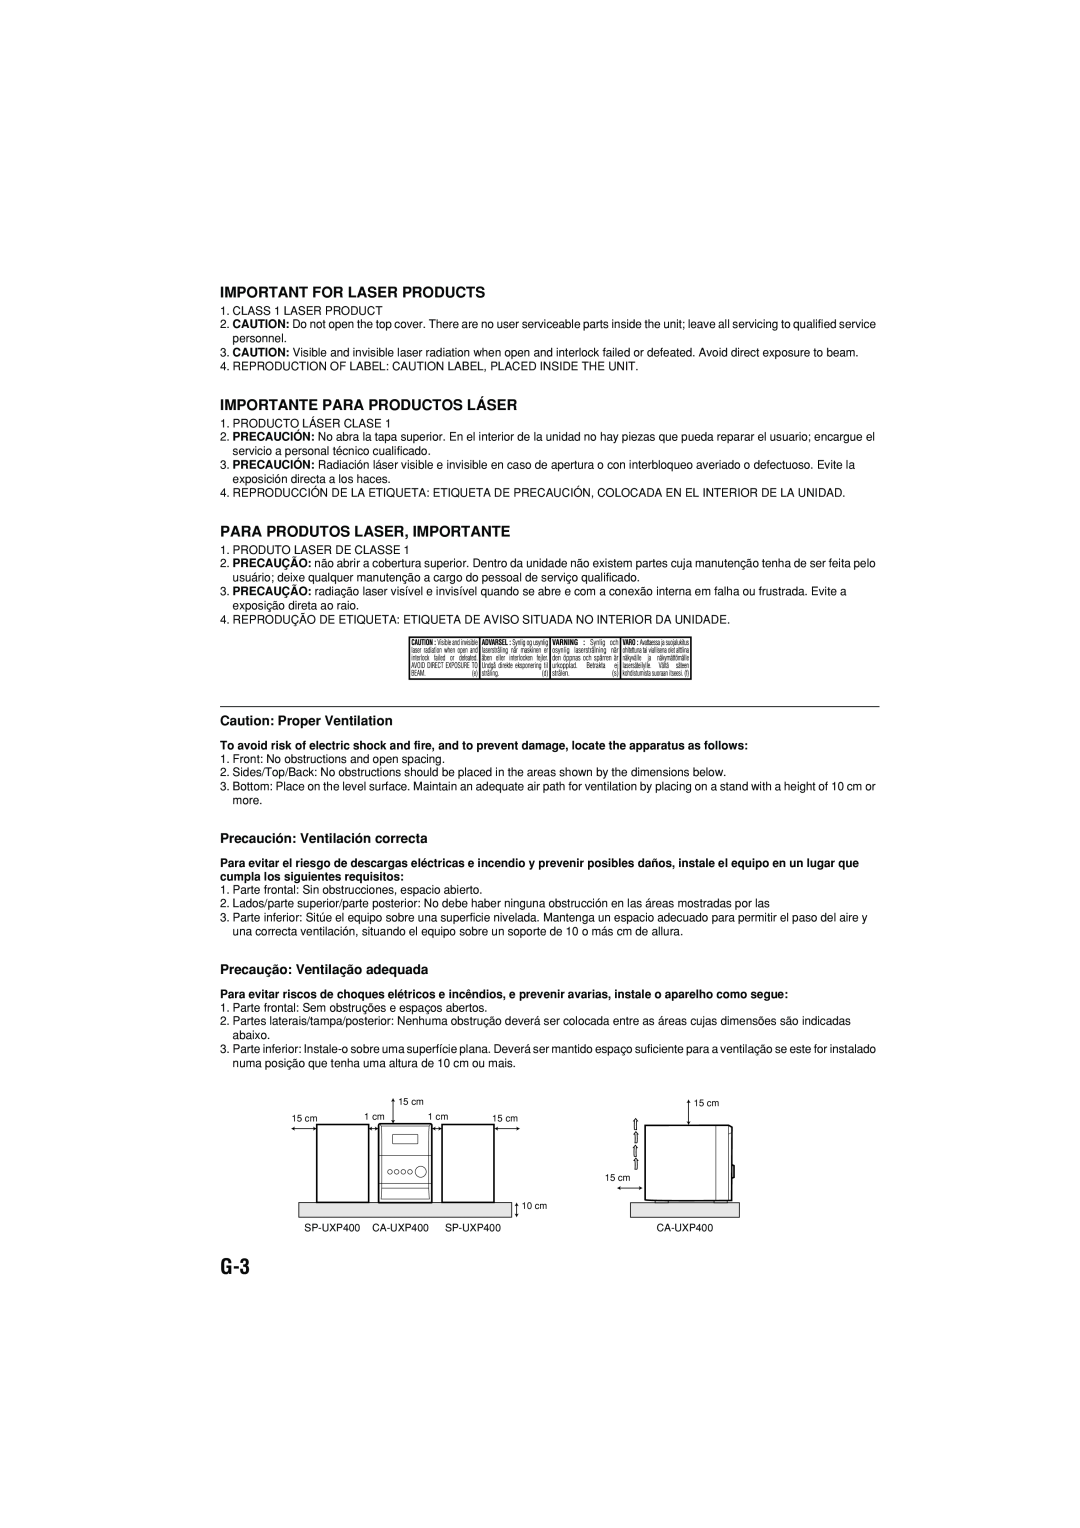 JVC UX-P400 manual Important For Laser Products, Importante Para Productos Láser, Para Produtos Laser, Importante 